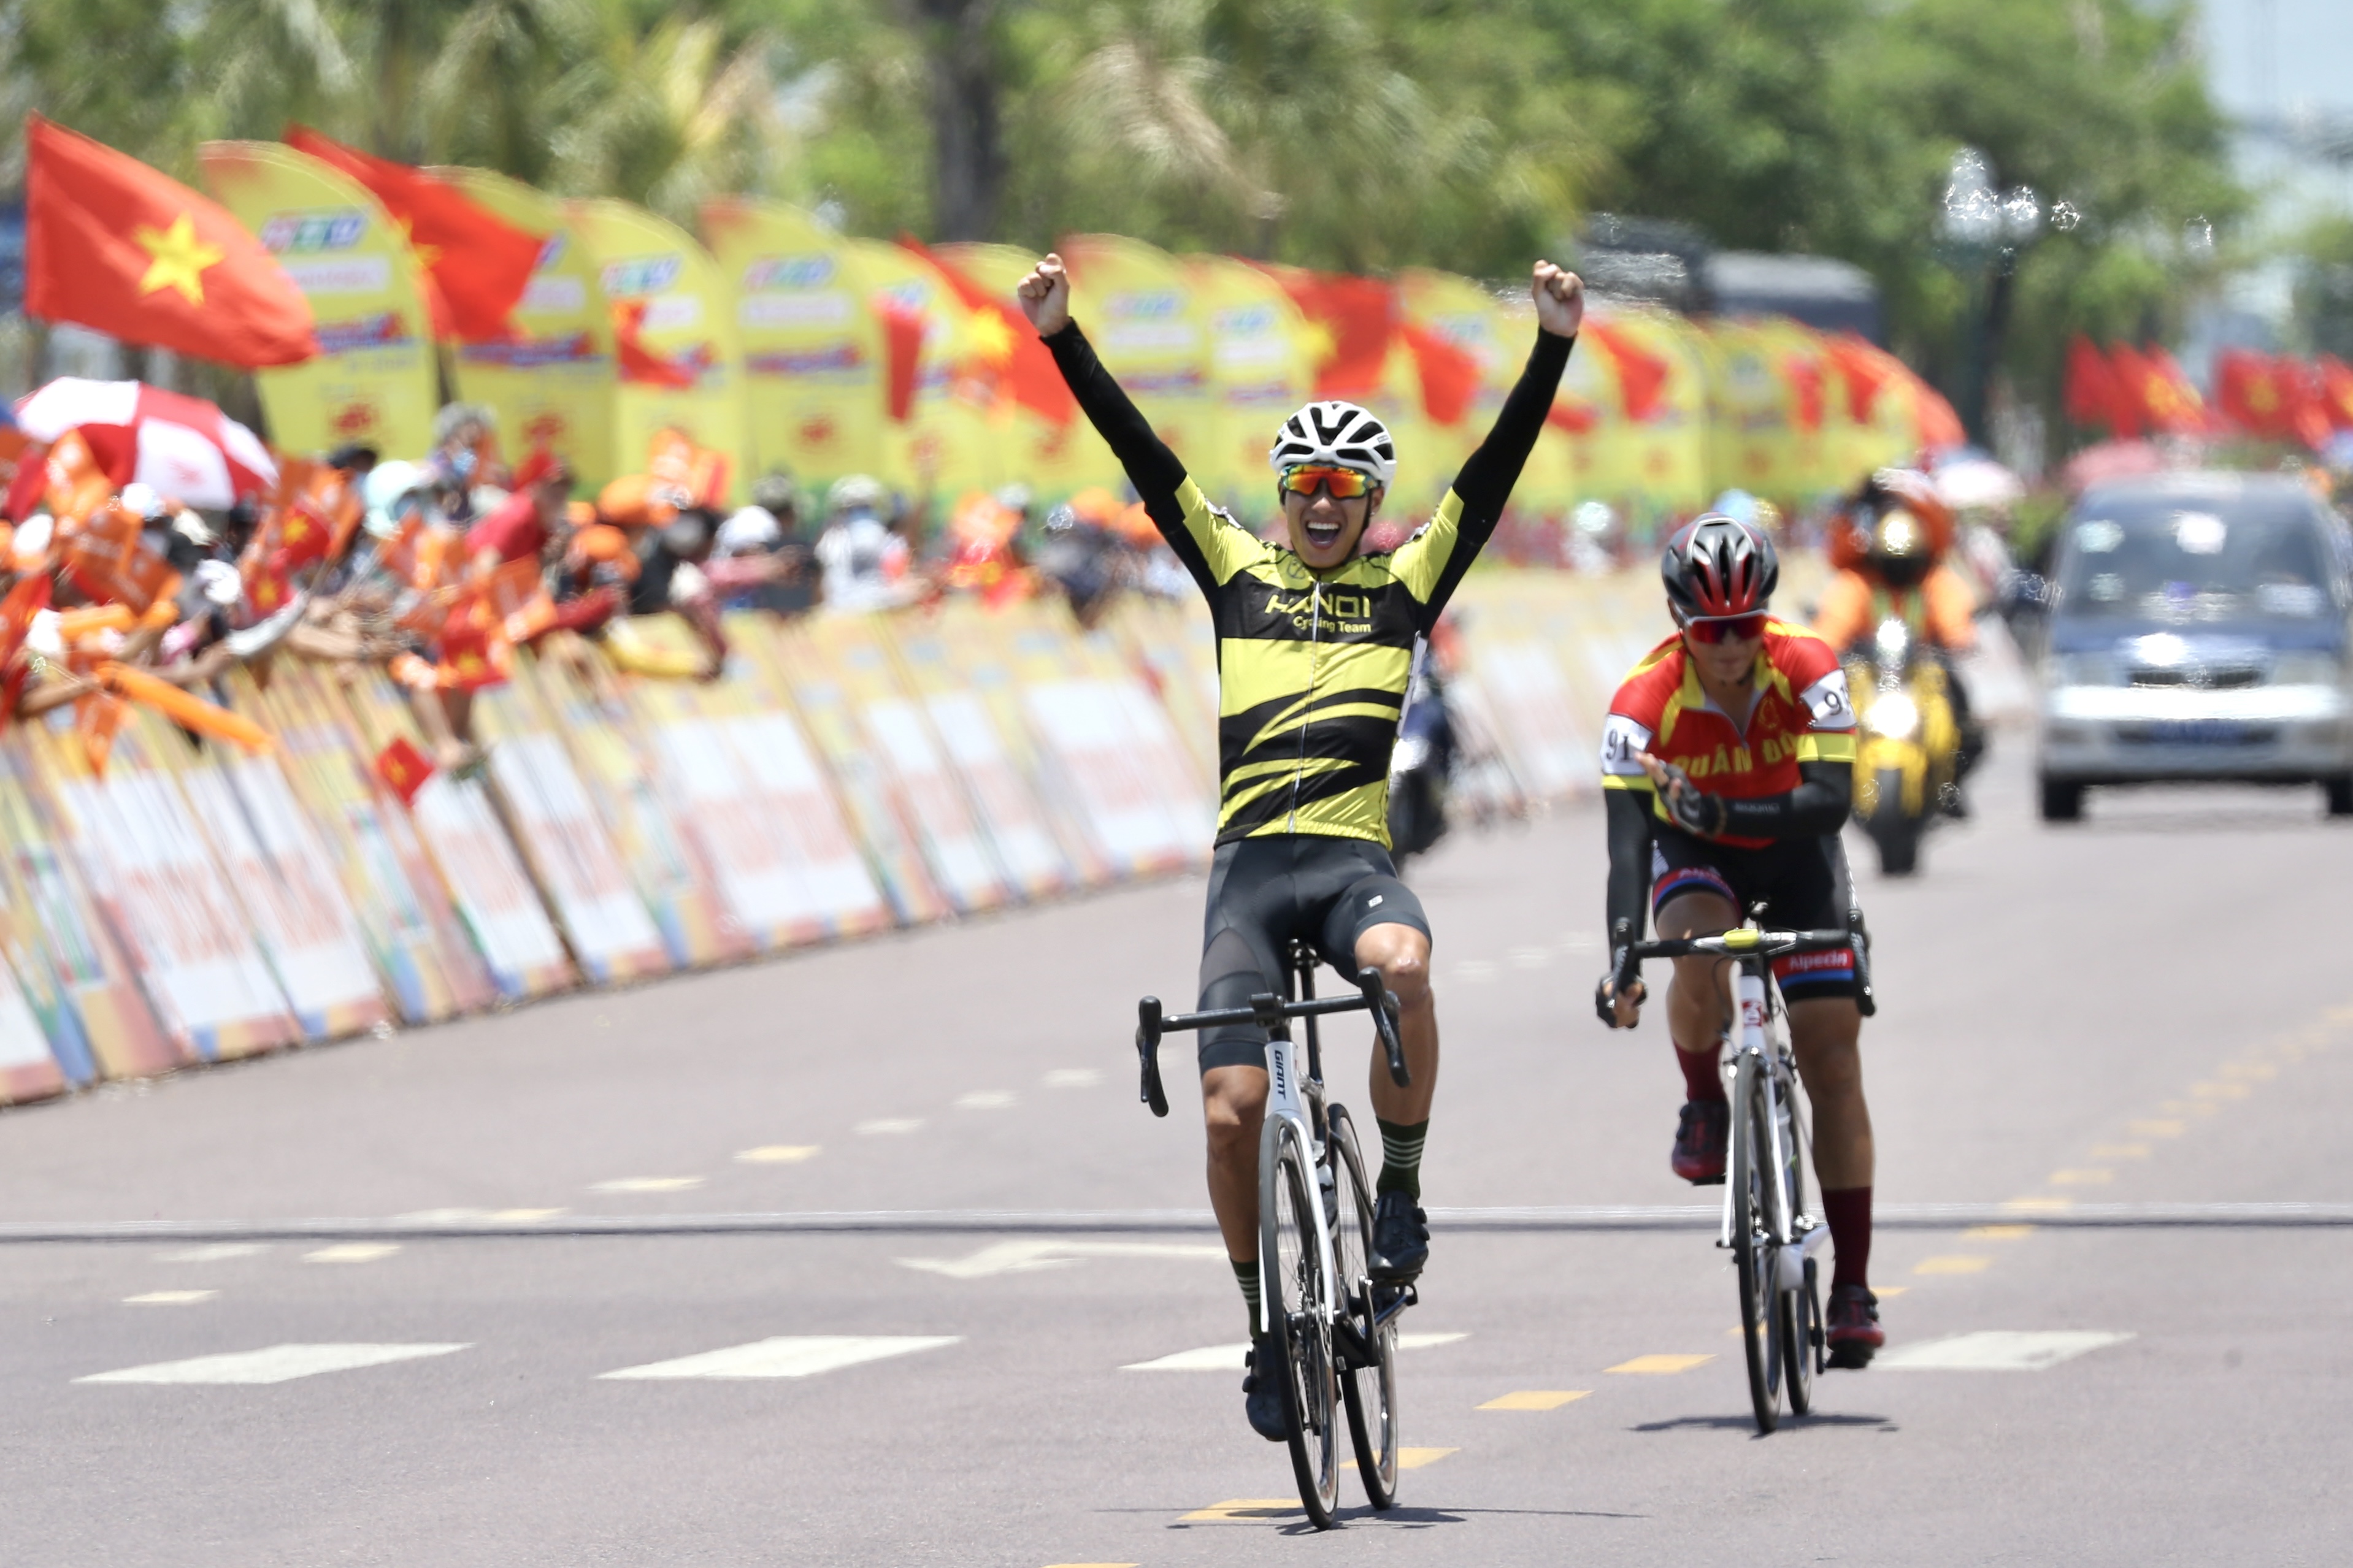 Hanoi rider wins national cycling race’s stage 16